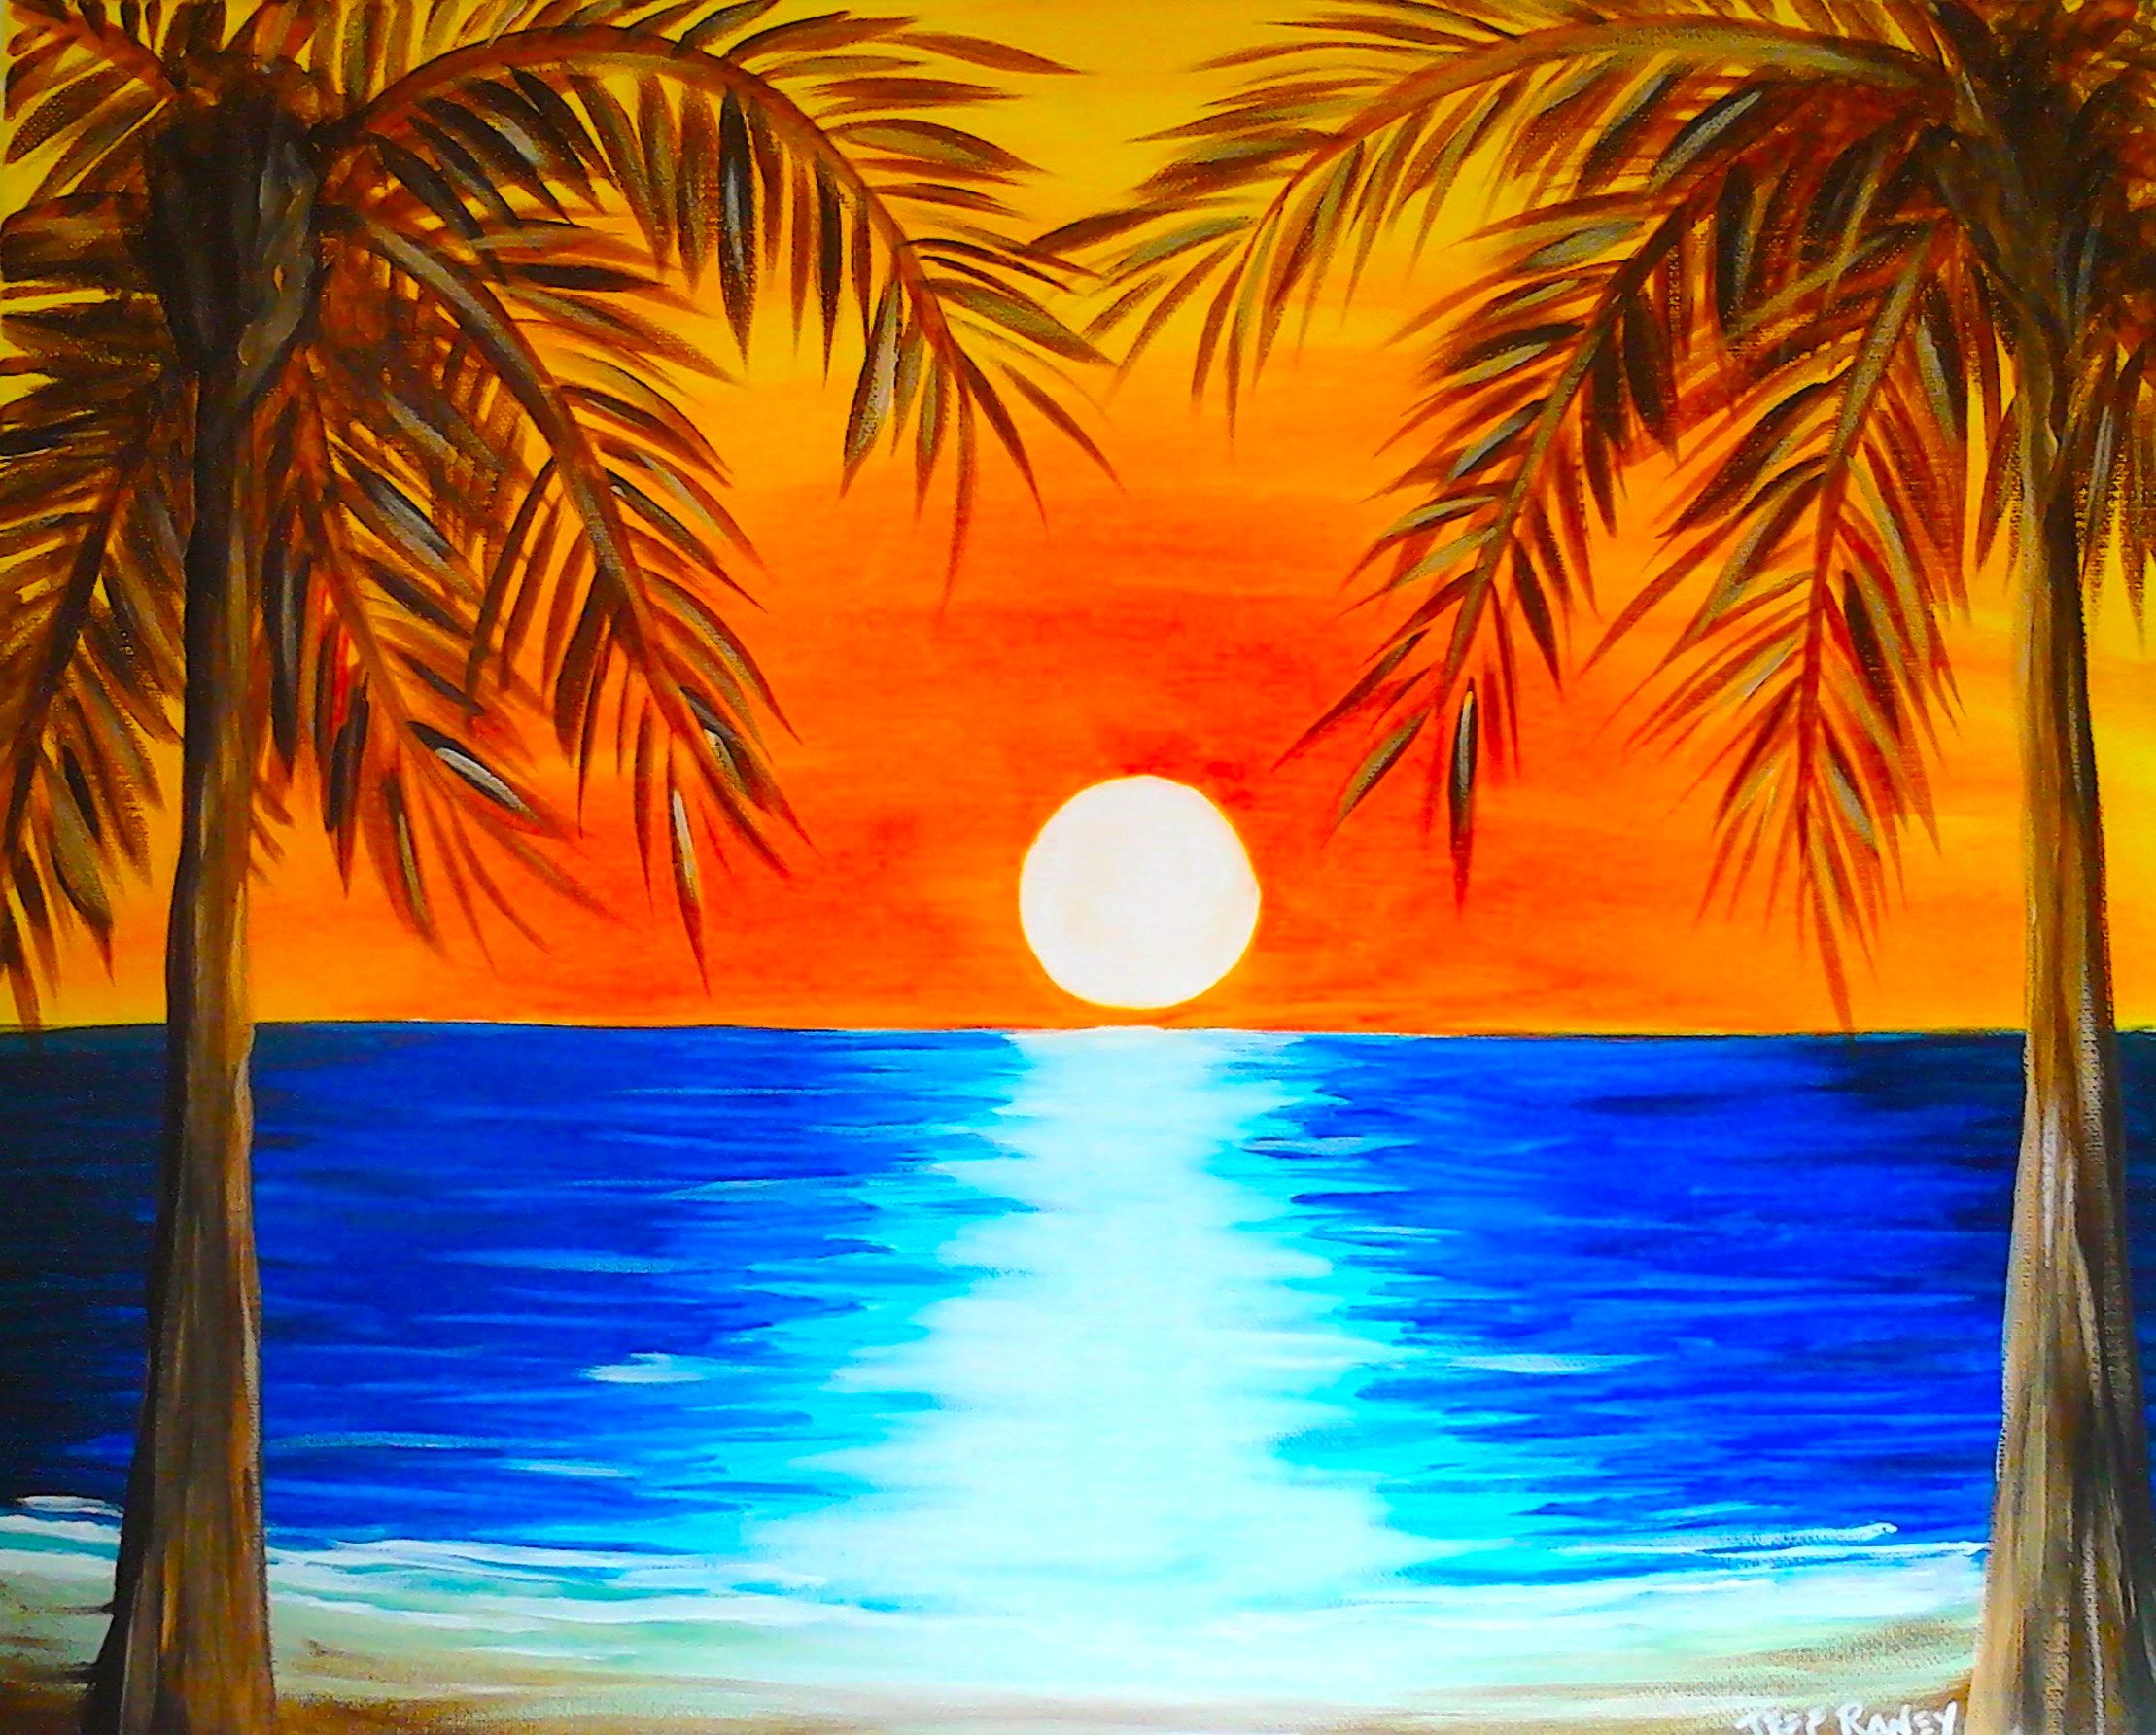 Sunset Drawing Pencil Colour Colored pencil Sunset Beach by ducttape